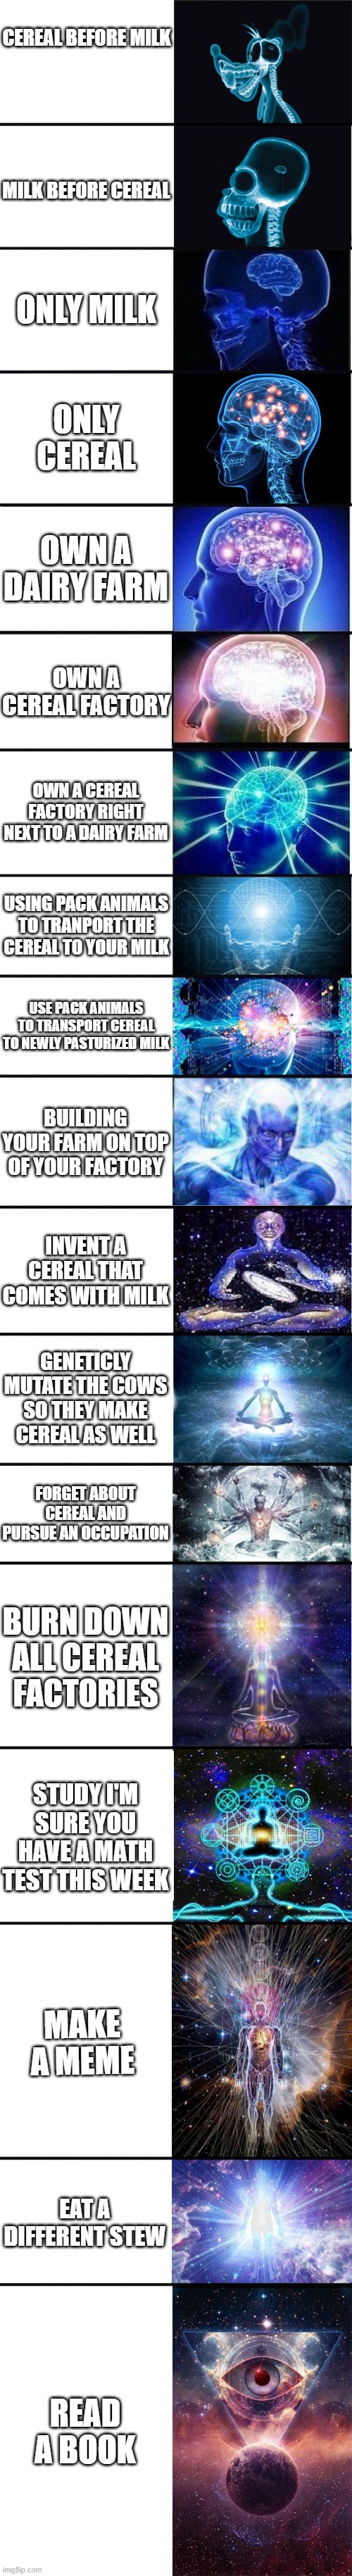 expanding brain: 9001 | CEREAL BEFORE MILK; MILK BEFORE CEREAL; ONLY MILK; ONLY CEREAL; OWN A DAIRY FARM; OWN A CEREAL FACTORY; OWN A CEREAL FACTORY RIGHT NEXT TO A DAIRY FARM; USING PACK ANIMALS TO TRANPORT THE CEREAL TO YOUR MILK; USE PACK ANIMALS TO TRANSPORT CEREAL TO NEWLY PASTURIZED MILK; BUILDING YOUR FARM ON TOP OF YOUR FACTORY; INVENT A CEREAL THAT COMES WITH MILK; GENETICLY MUTATE THE COWS SO THEY MAKE CEREAL AS WELL; FORGET ABOUT CEREAL AND PURSUE AN OCCUPATION; BURN DOWN ALL CEREAL FACTORIES; STUDY I'M SURE YOU HAVE A MATH TEST THIS WEEK; MAKE A MEME; EAT A DIFFERENT STEW; READ A BOOK | image tagged in expanding brain 9001 | made w/ Imgflip meme maker